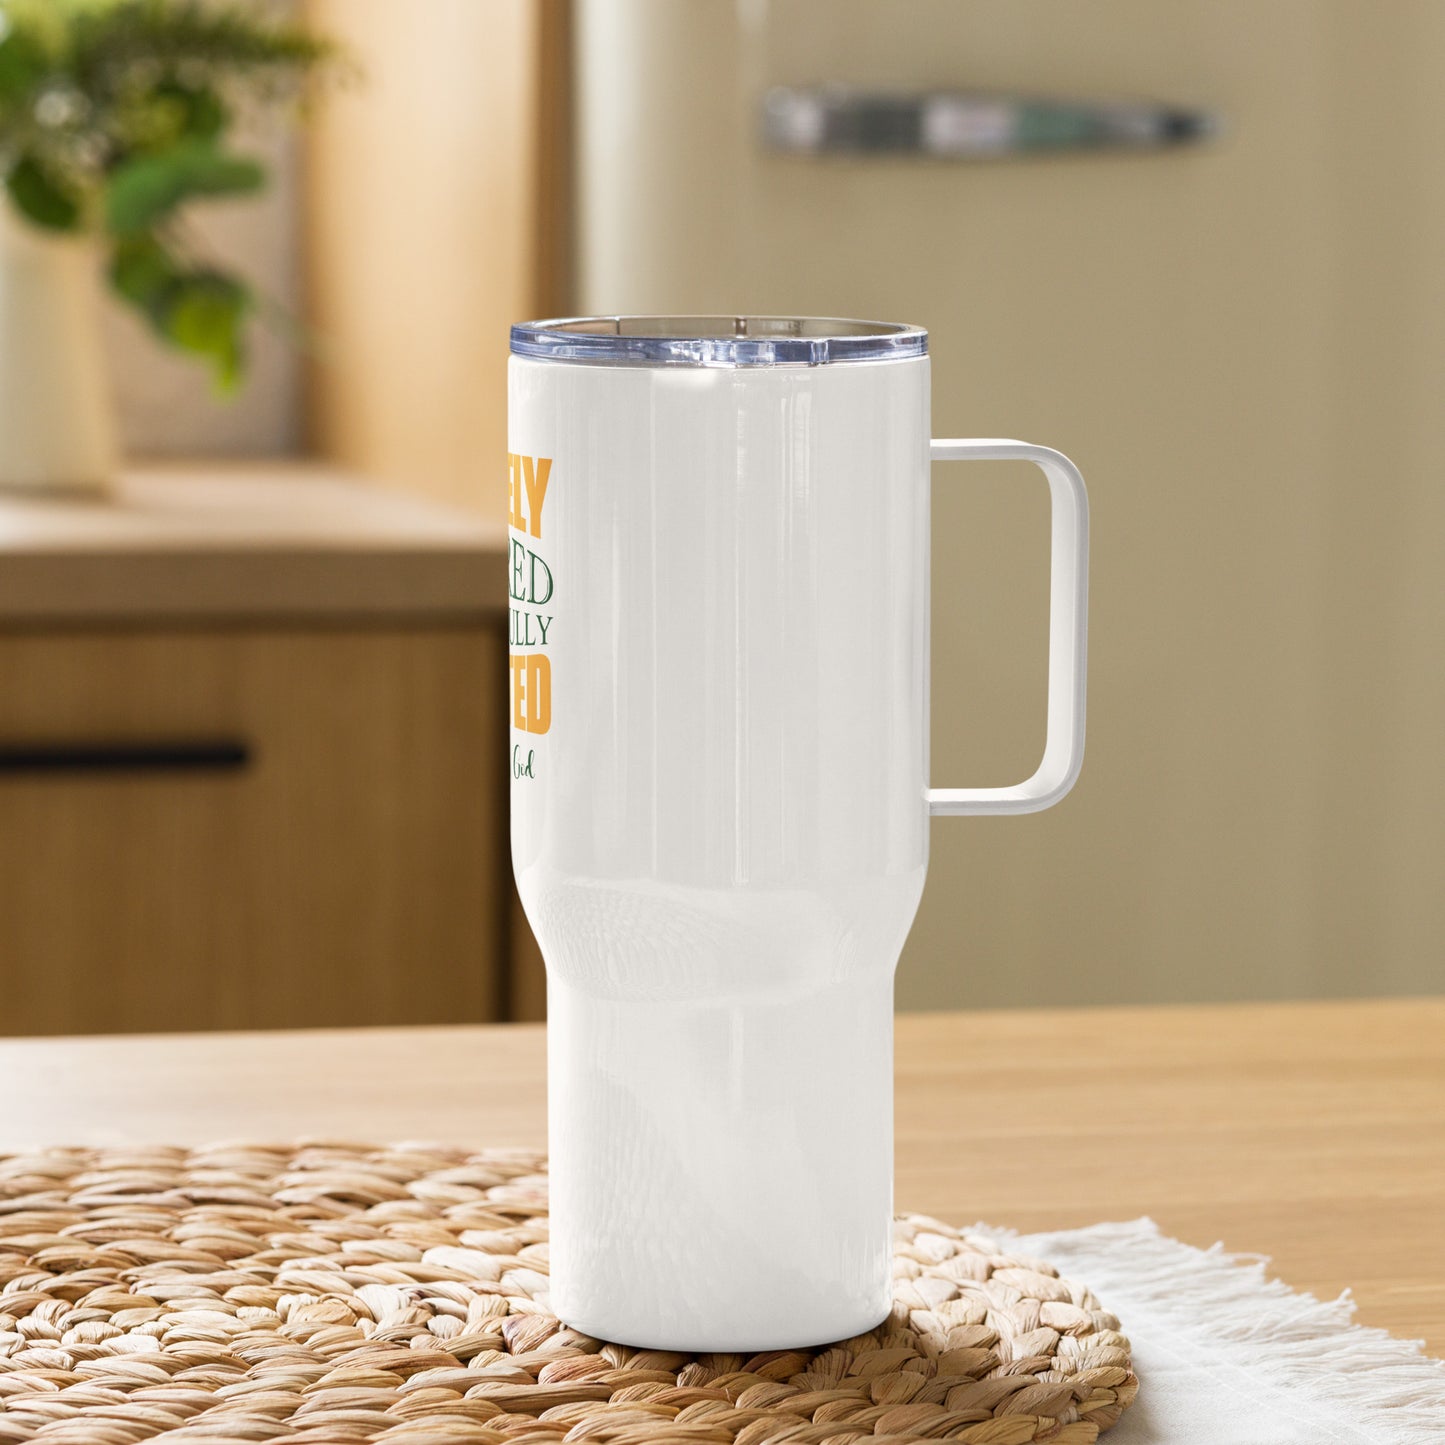 Divinely Inspired Purposefully Created Christian Travel mug with a handle